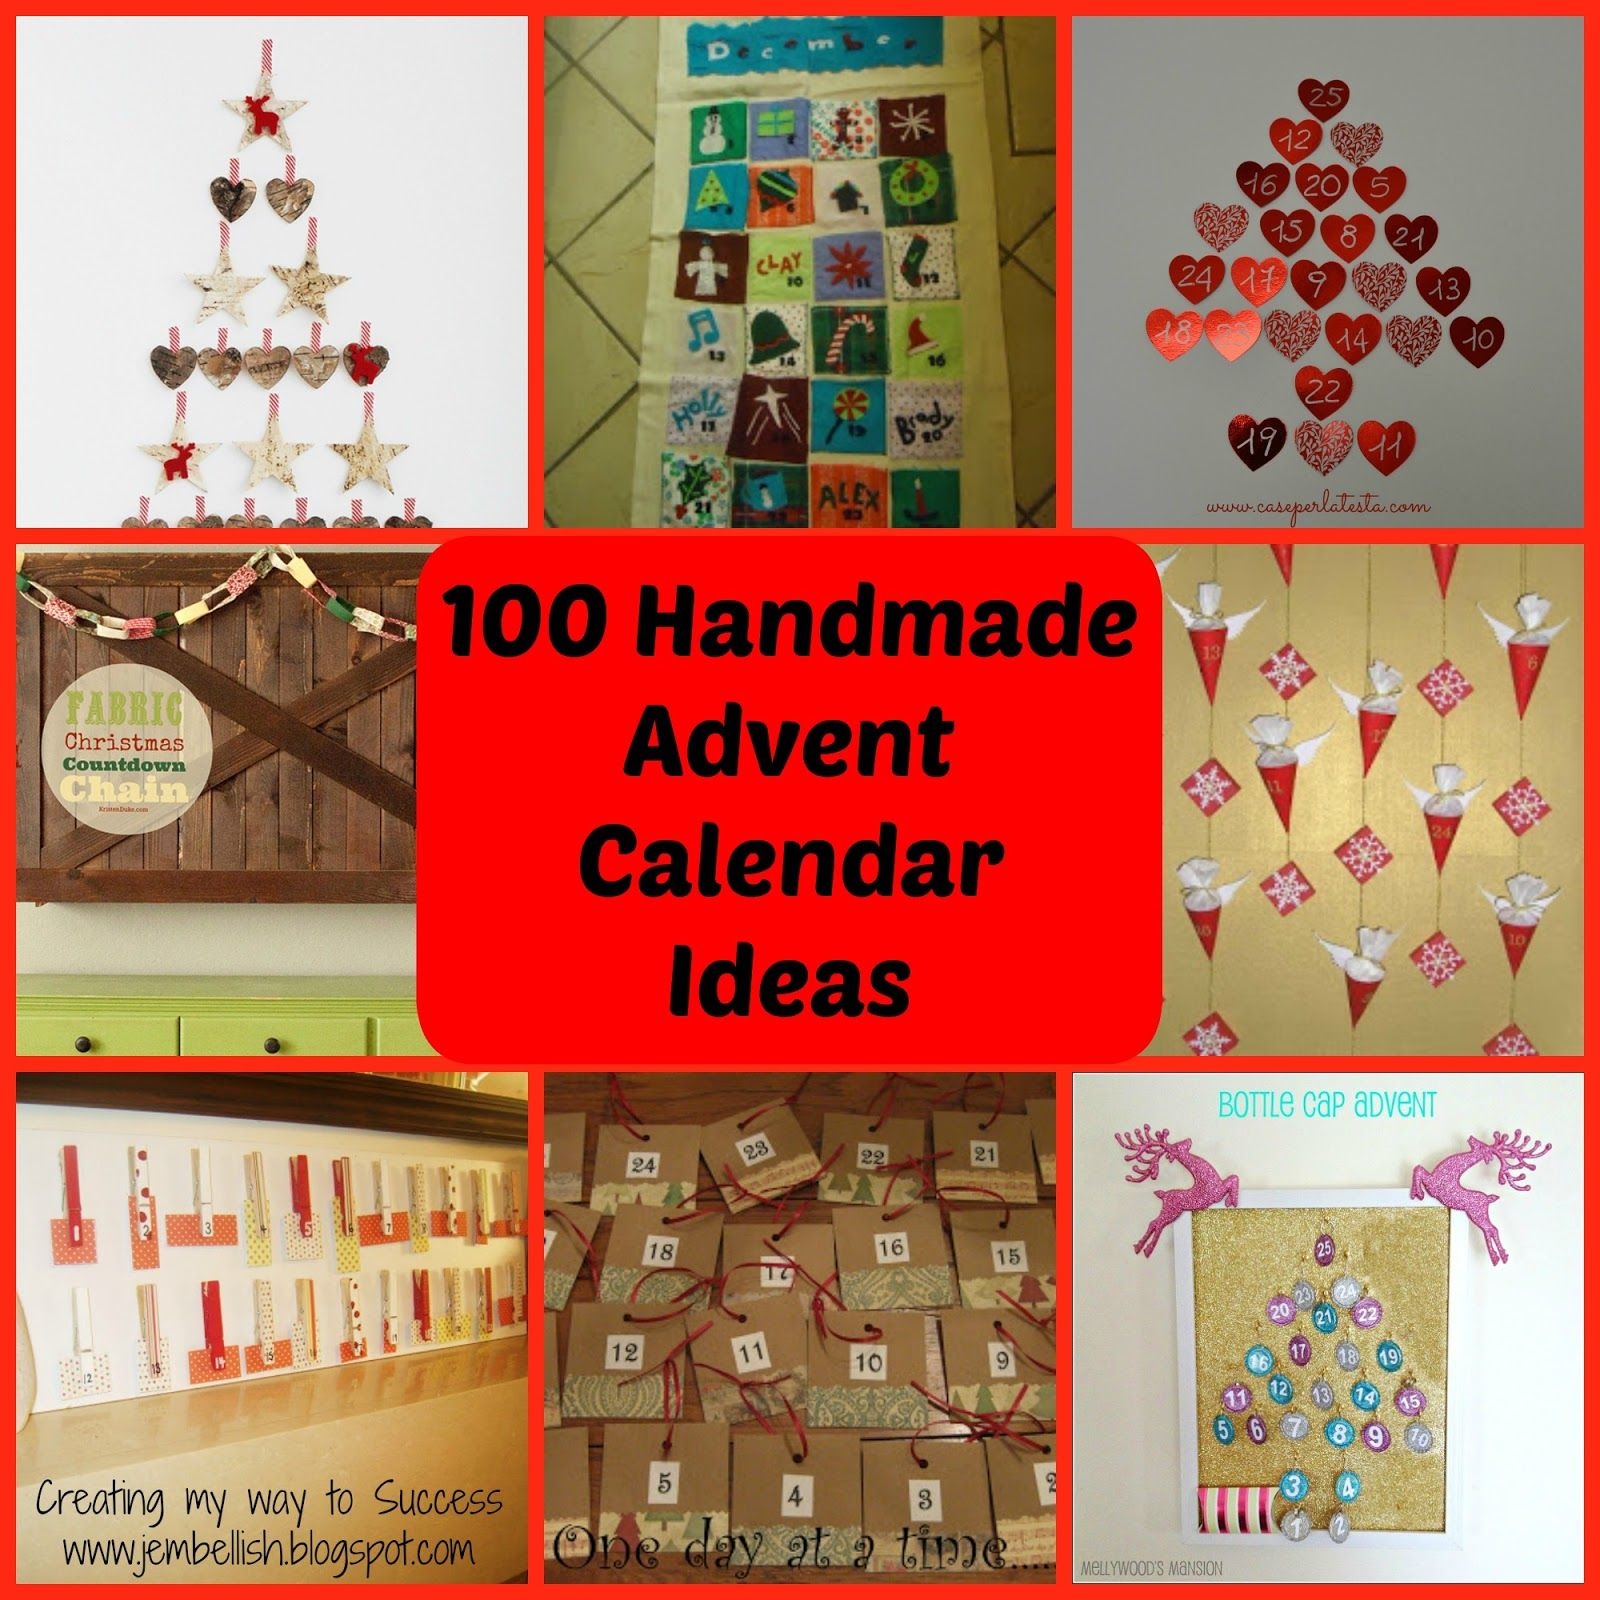 creating my way to success: 100 ideas for handmade advent